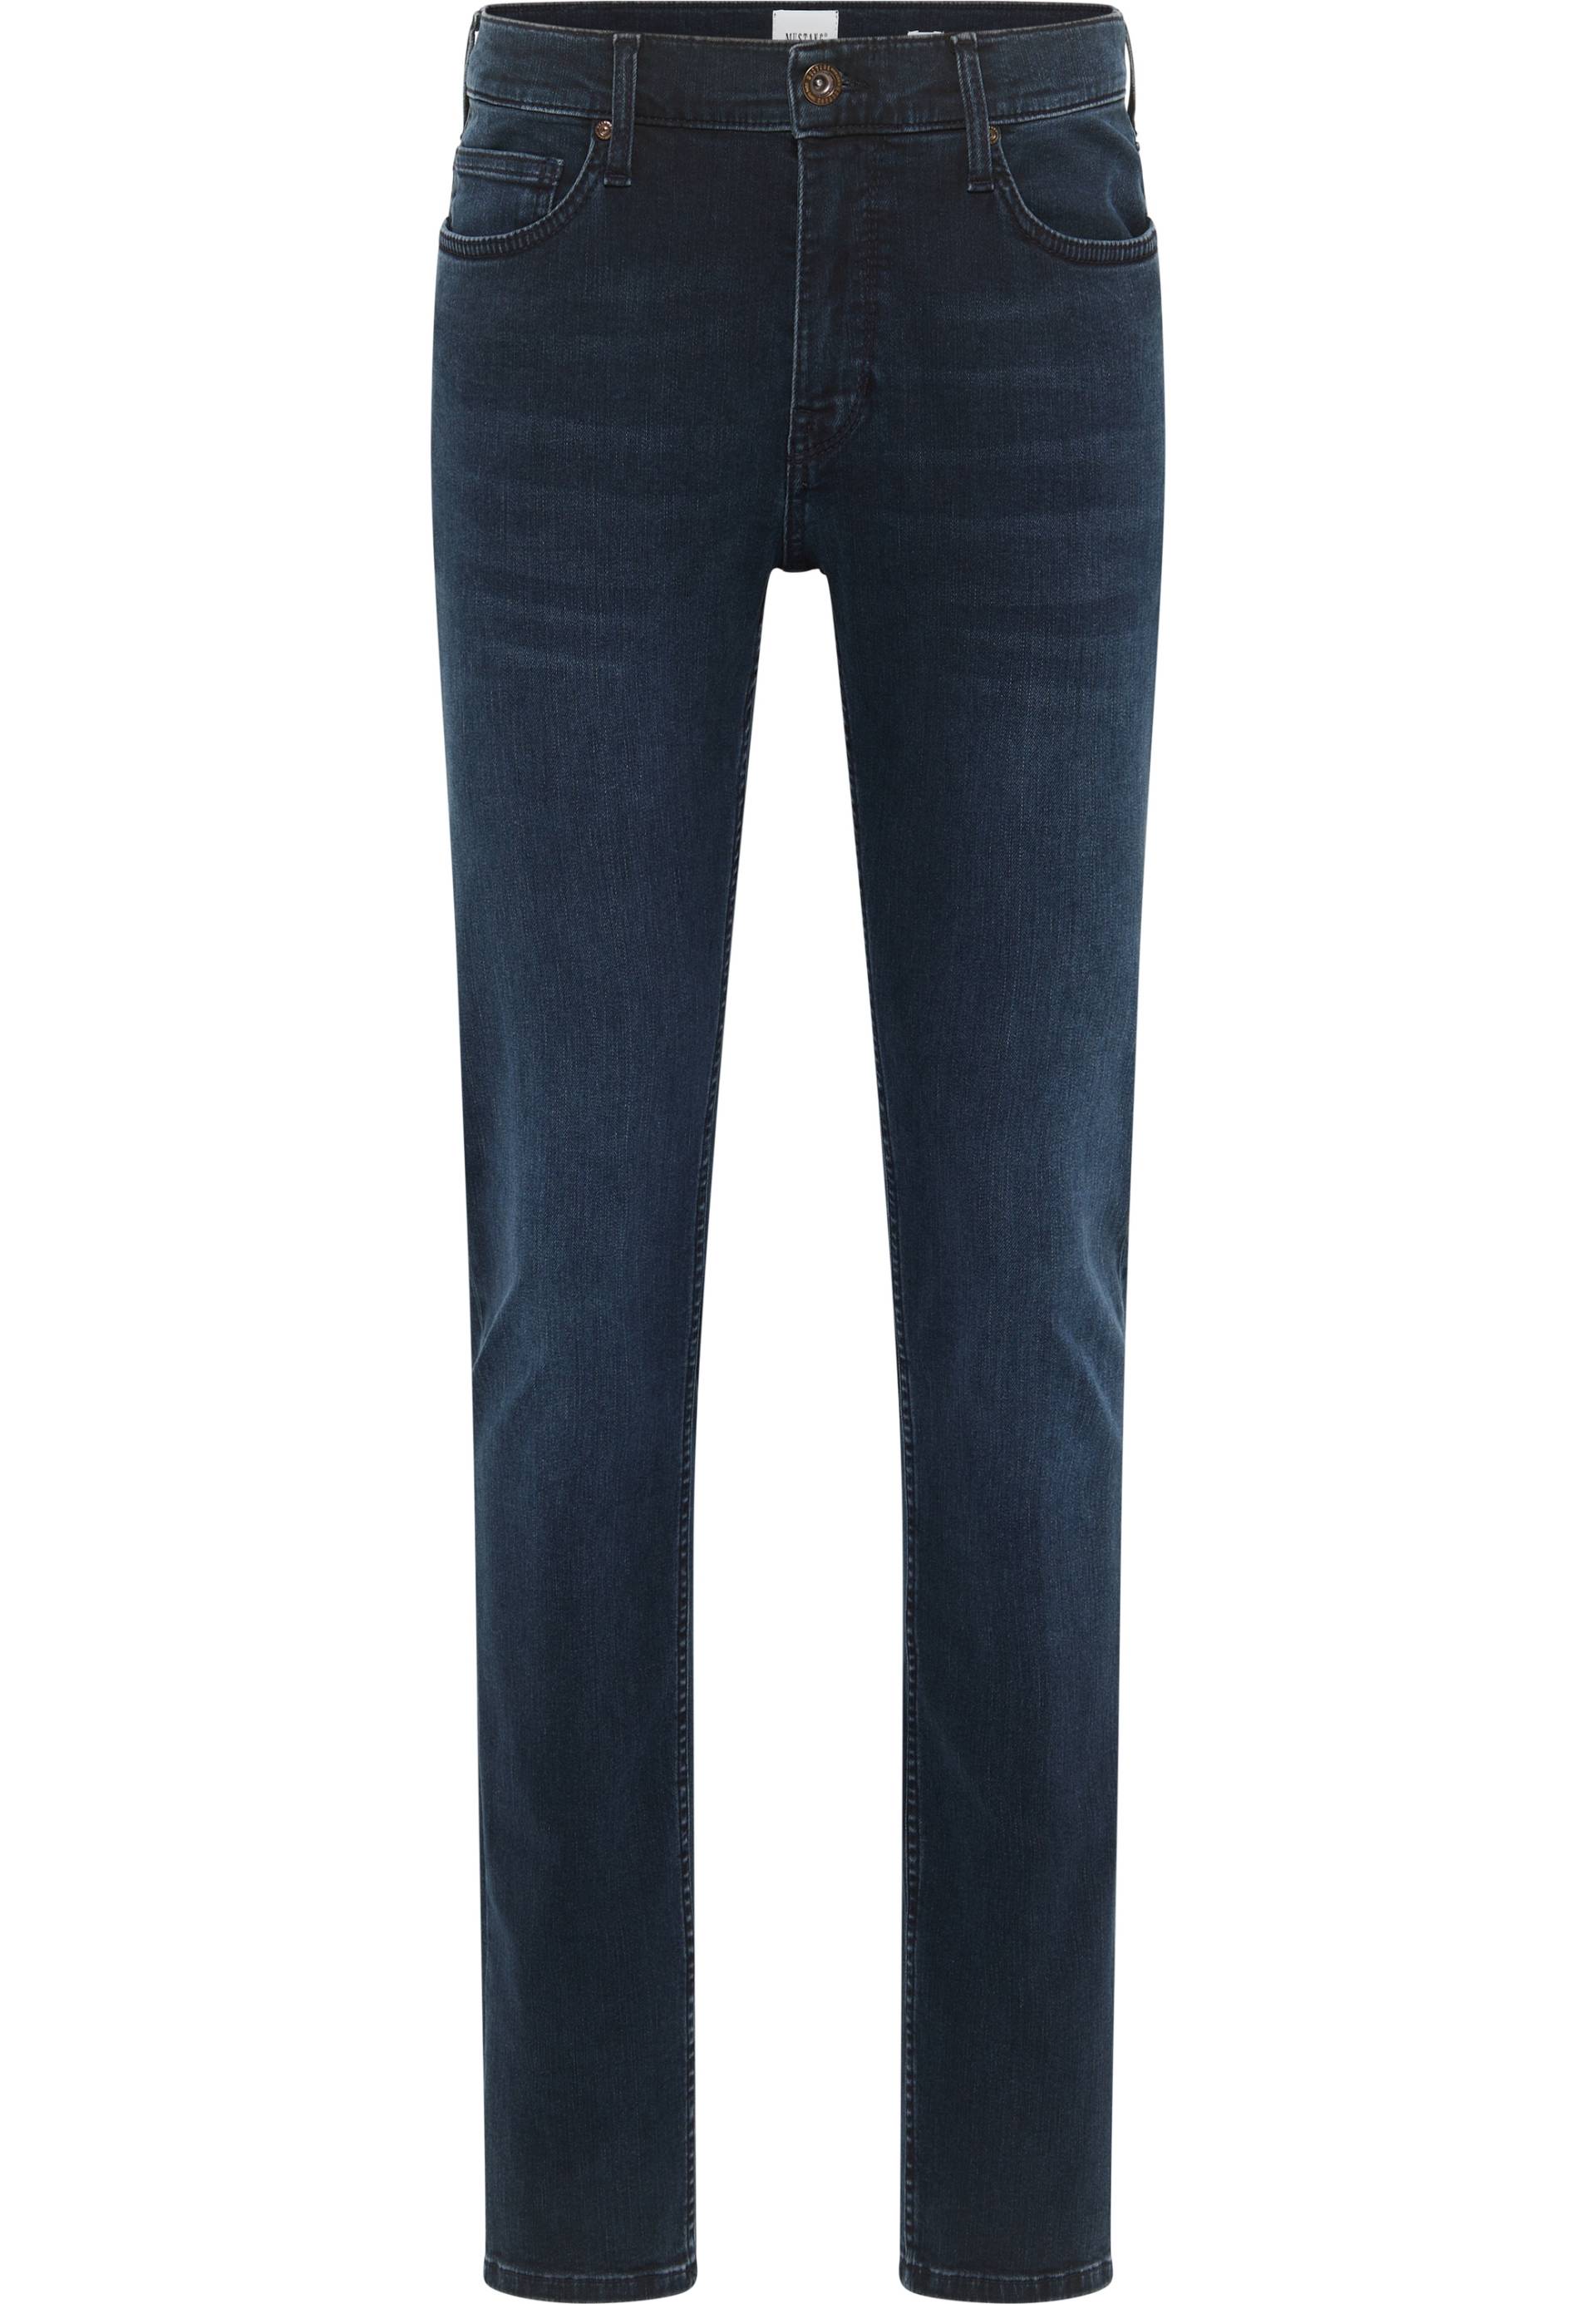 MUSTANG Skinny-fit-Jeans »Frisco Skinny« von Mustang